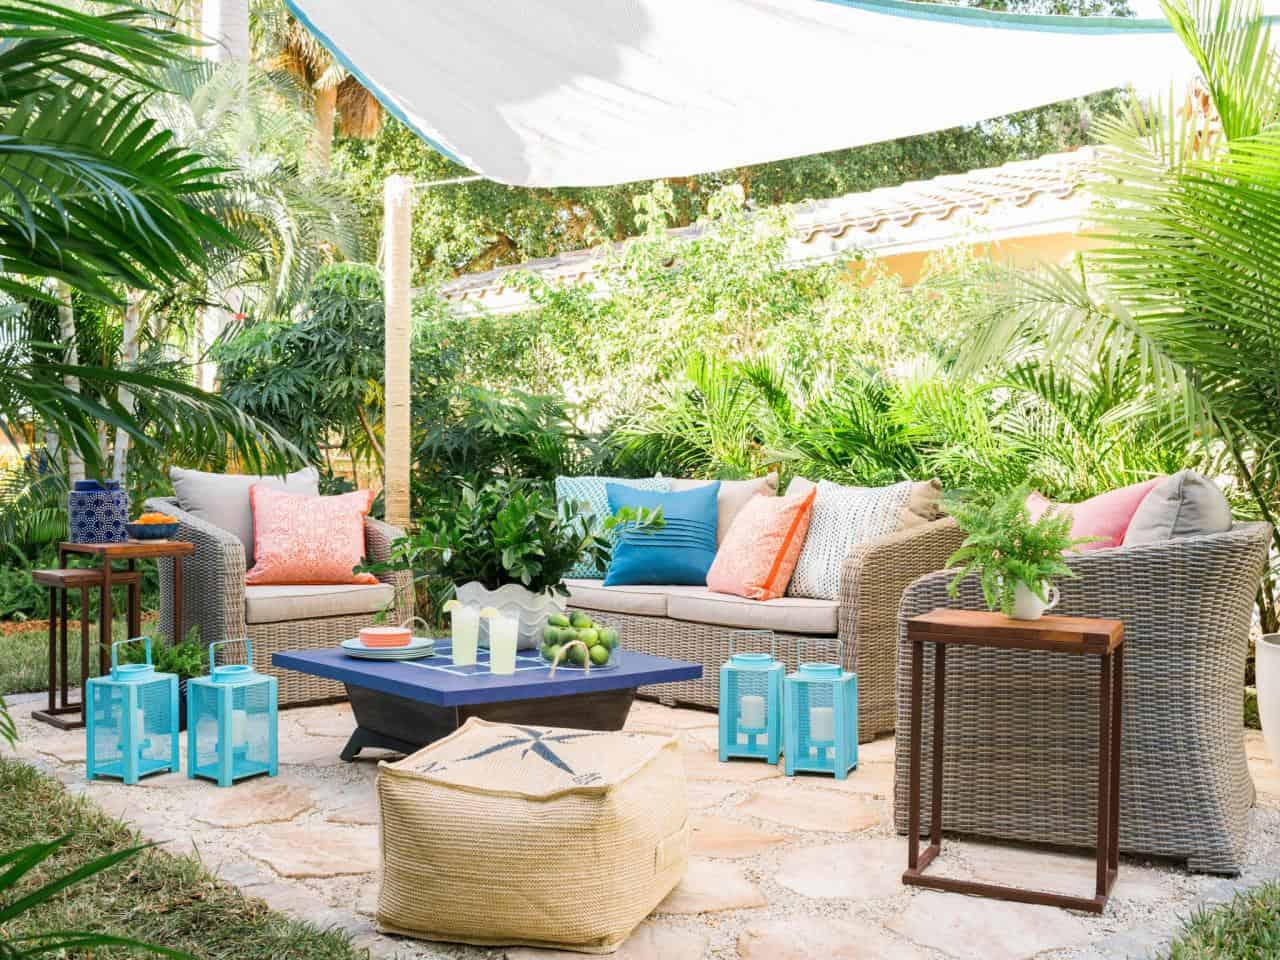  Chic Luxurious Patio Ideas perfect for a hot summer